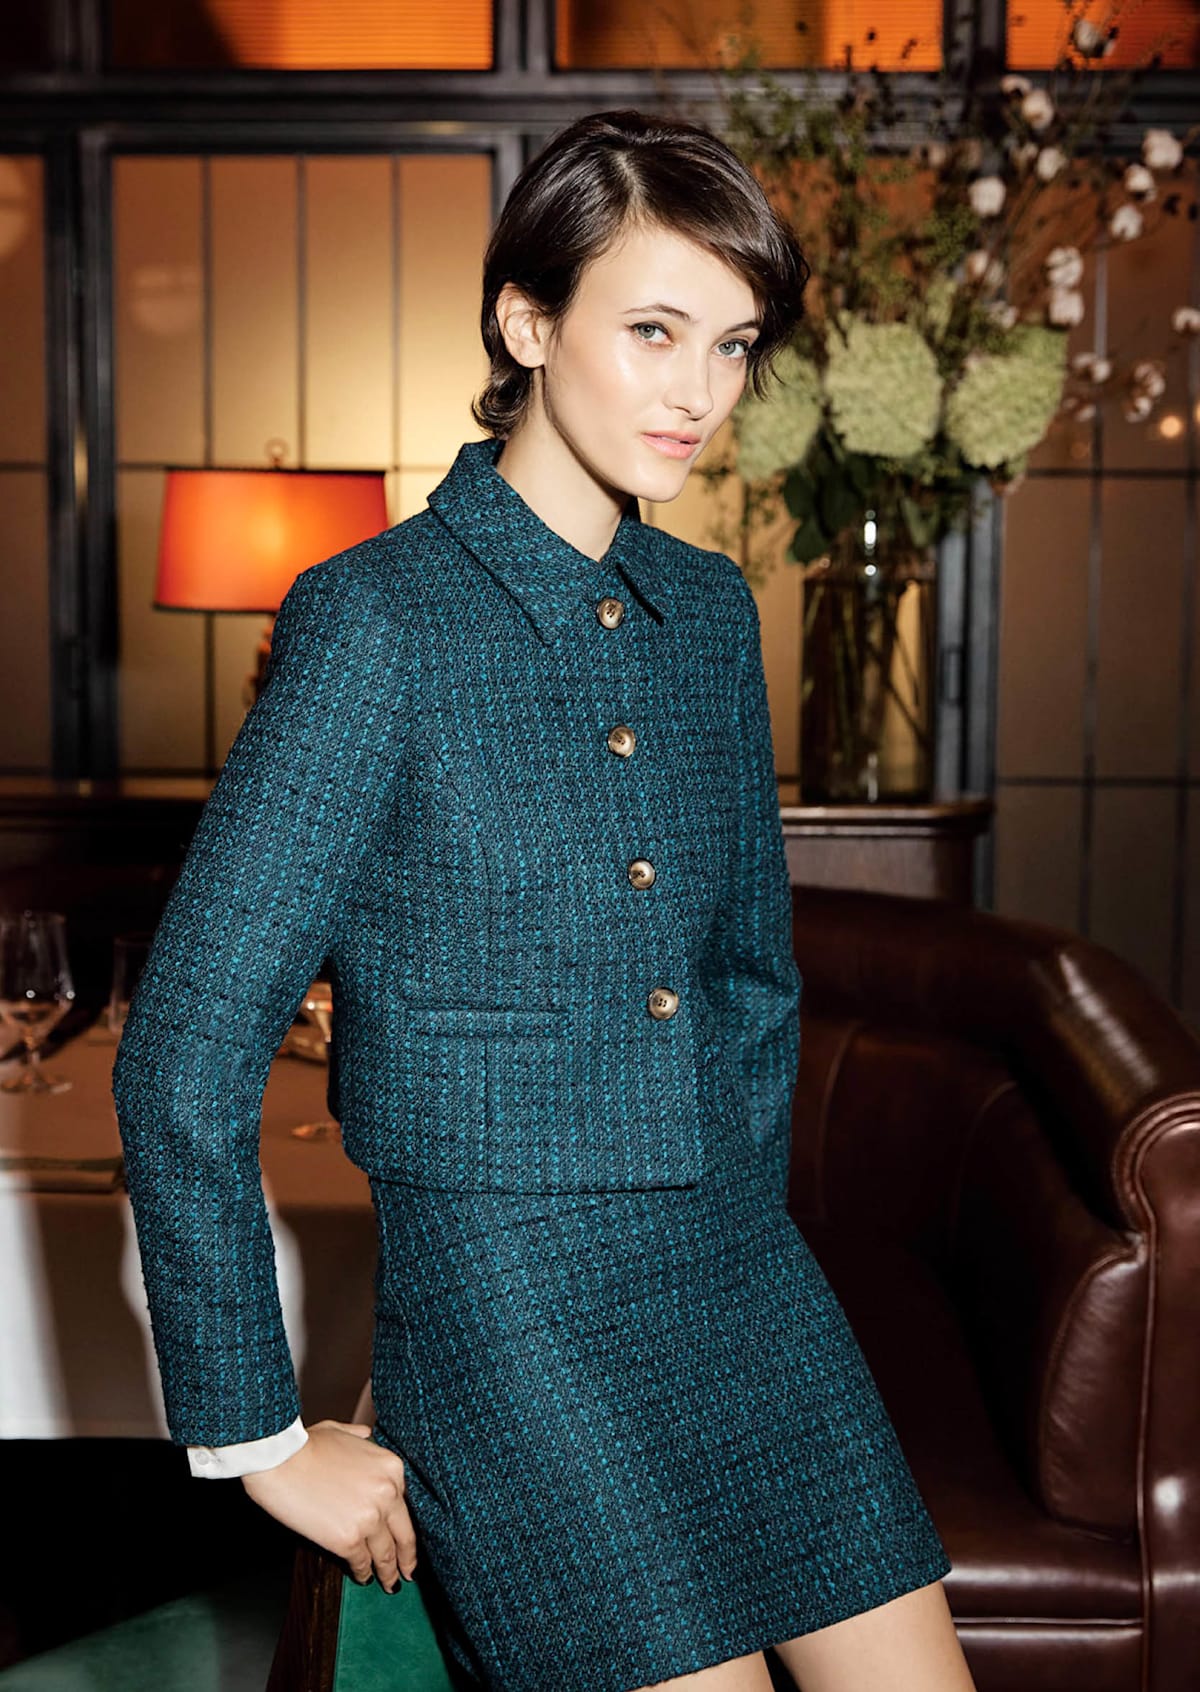 Model photographed sitting and standing in front of a chair wearing a satin shirt and a tweed jacket and skirt